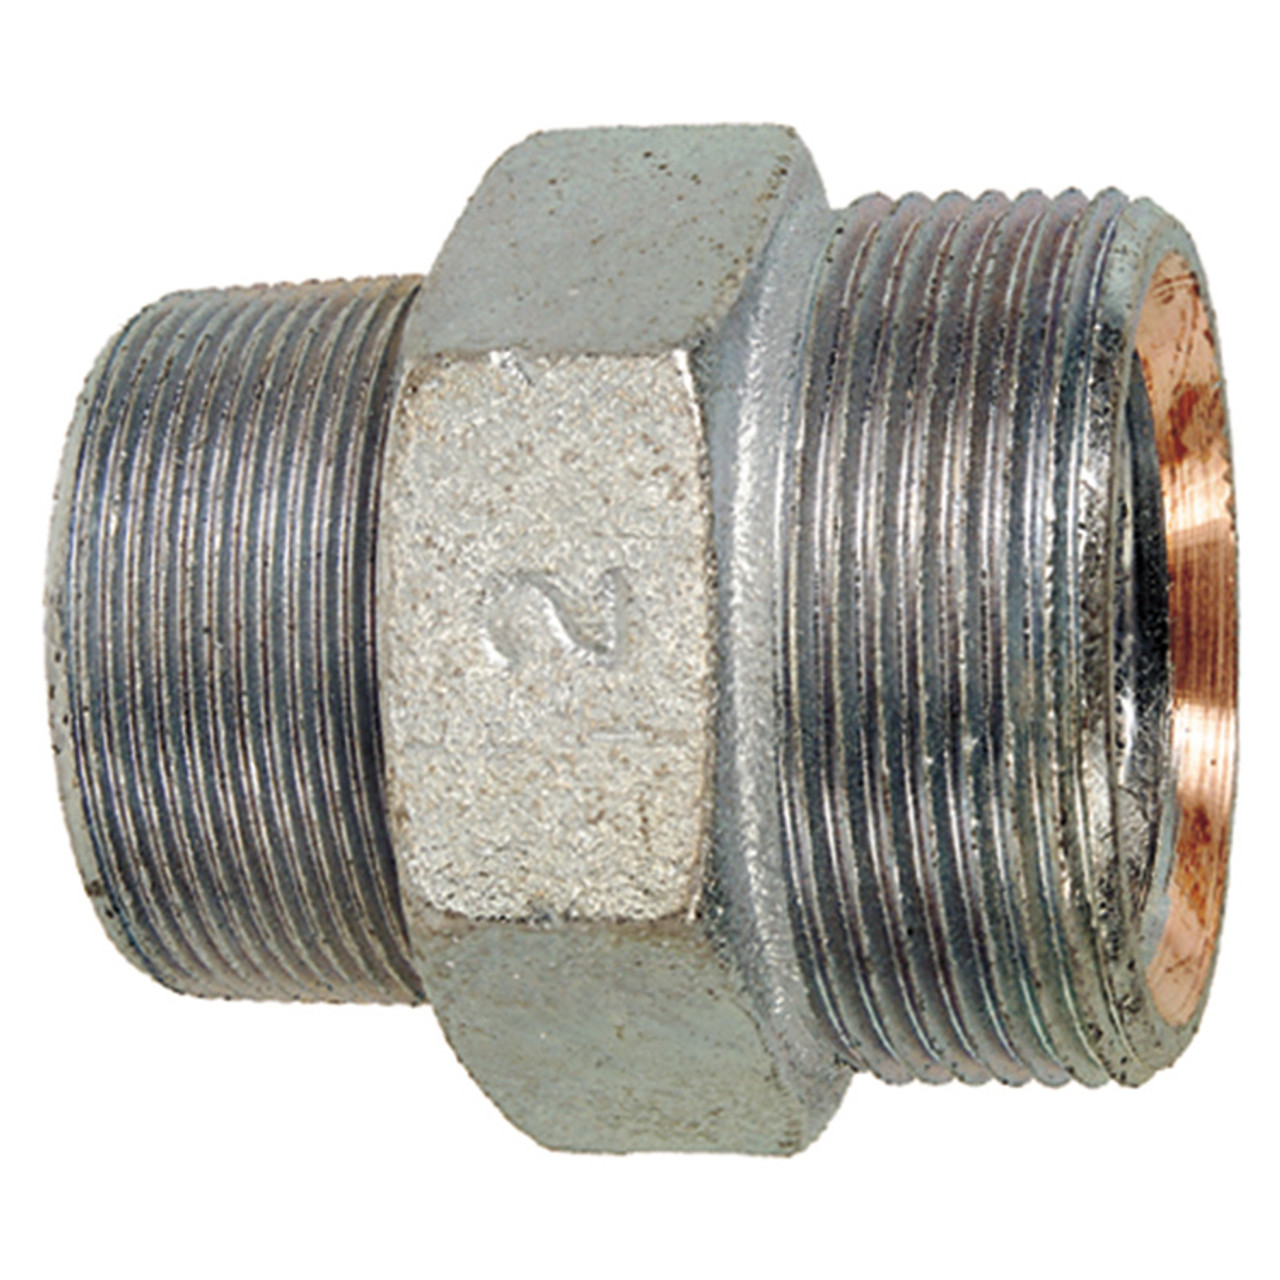 3/4" Ground Joint Male Spud  G29M-075